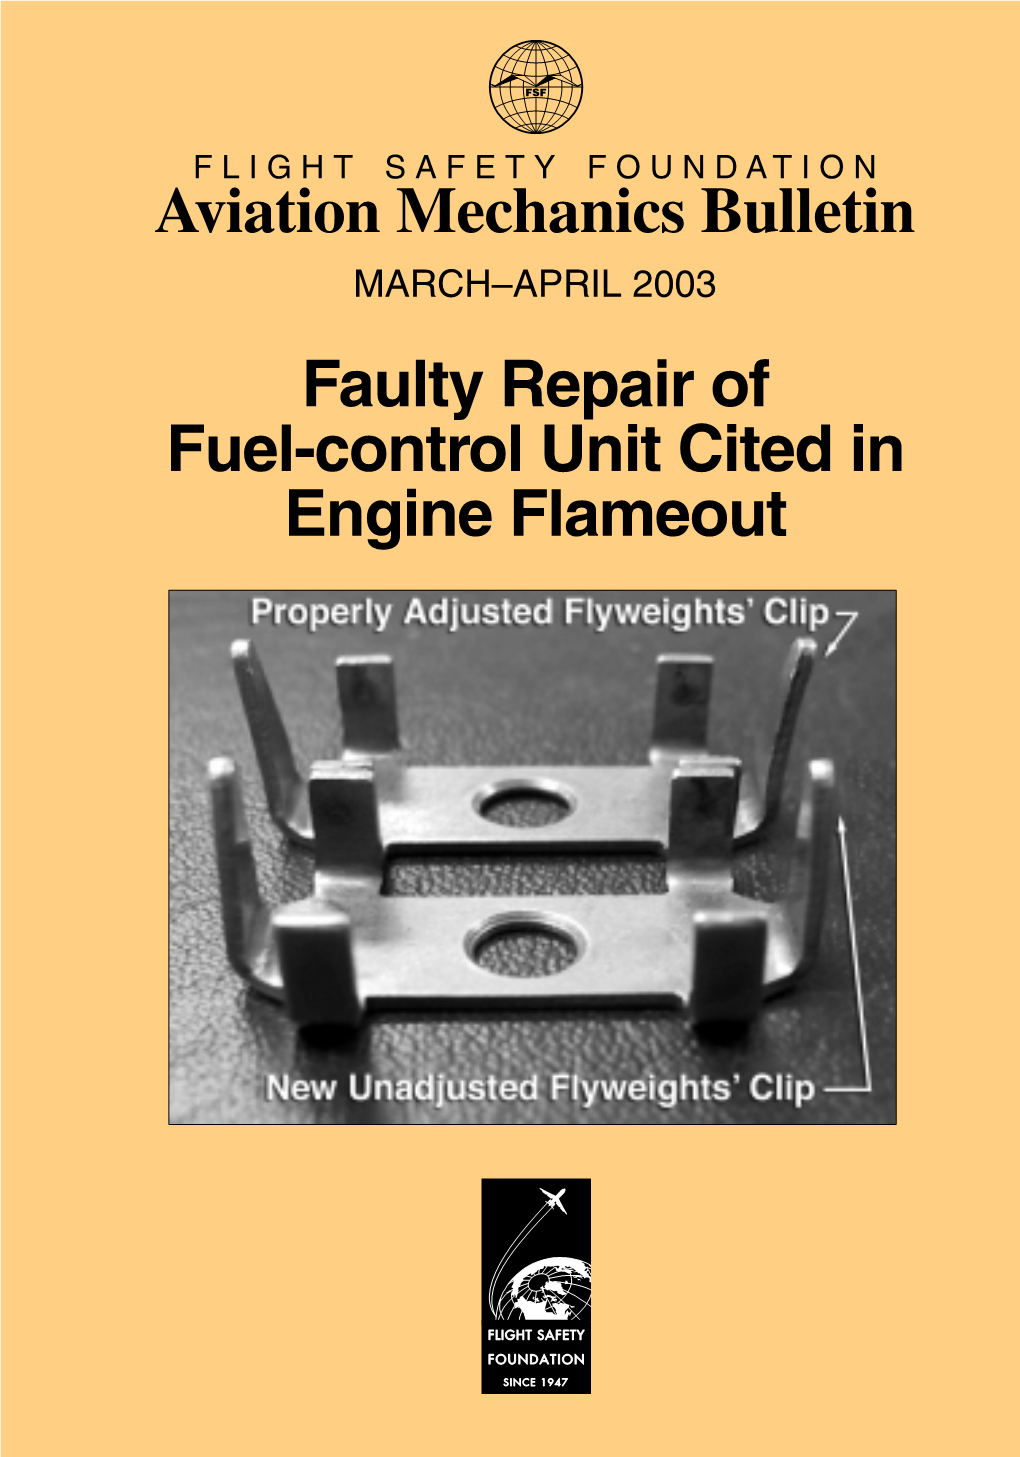 Faulty Repair of Fuel-Control Unit Cited in Engine Flameout